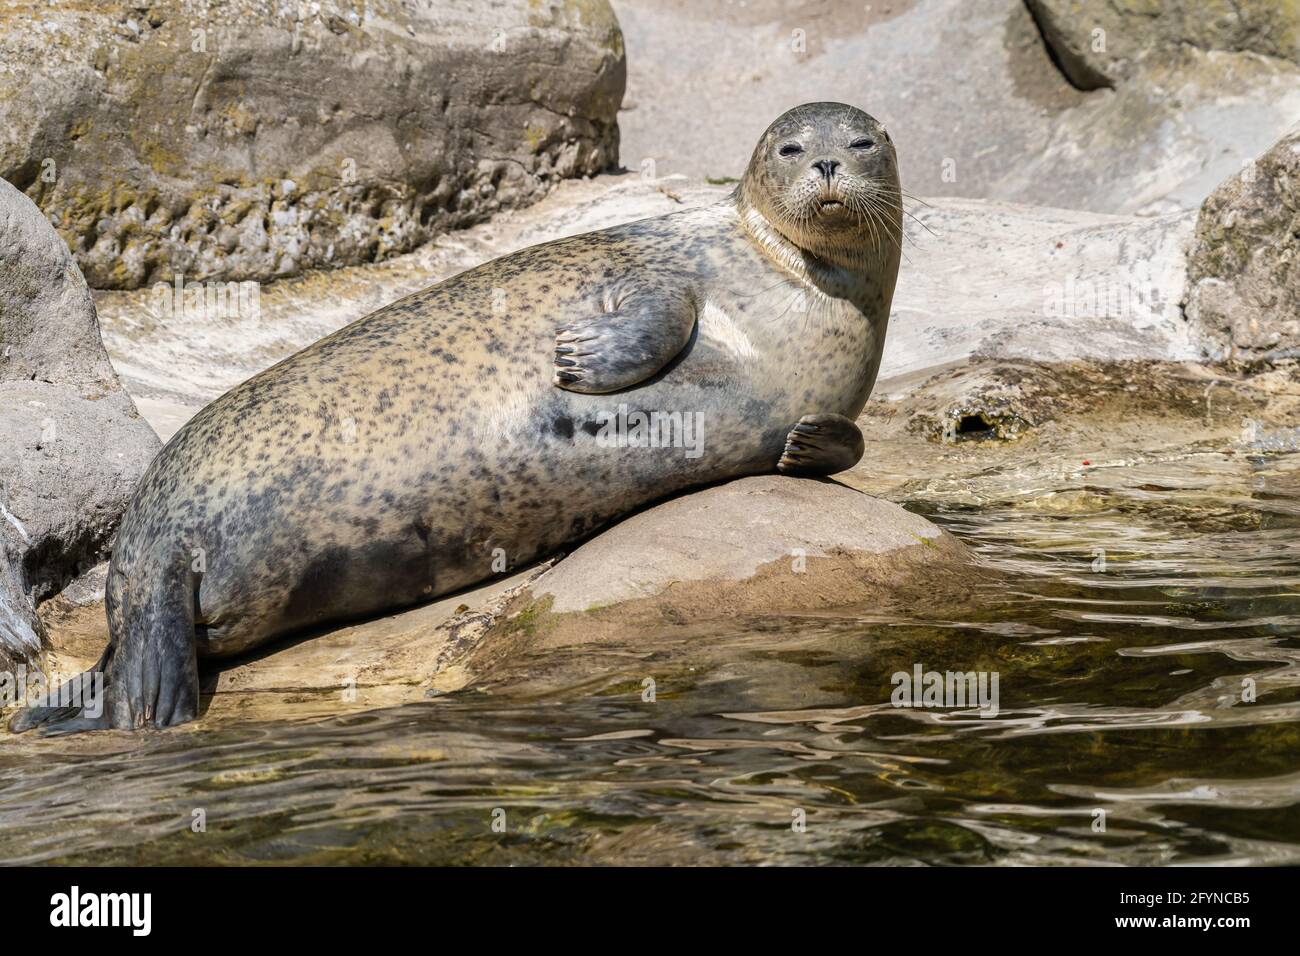 The harbor seal, also known as the common seal, is a true seal found along temperate and Arctic marine coastlines. Here a seal at zoo in Zurich, Switz Stock Photo